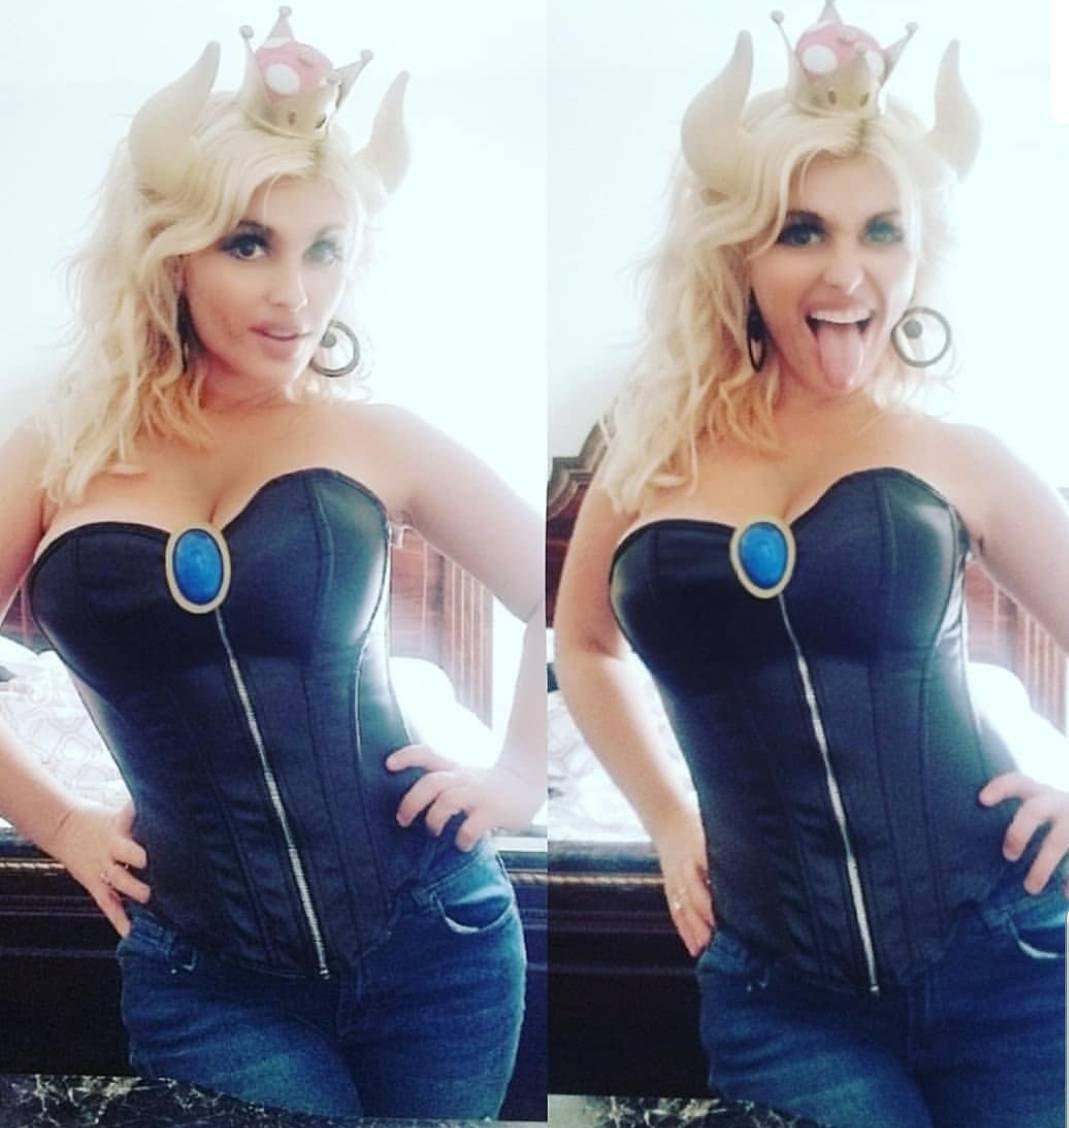 Supercrown lady Bowsette inspired horns and crown set  nintendo Matador-Bull-horns-headband comic-con cosplay horns gaming costume cow horns - Mud And Majesty